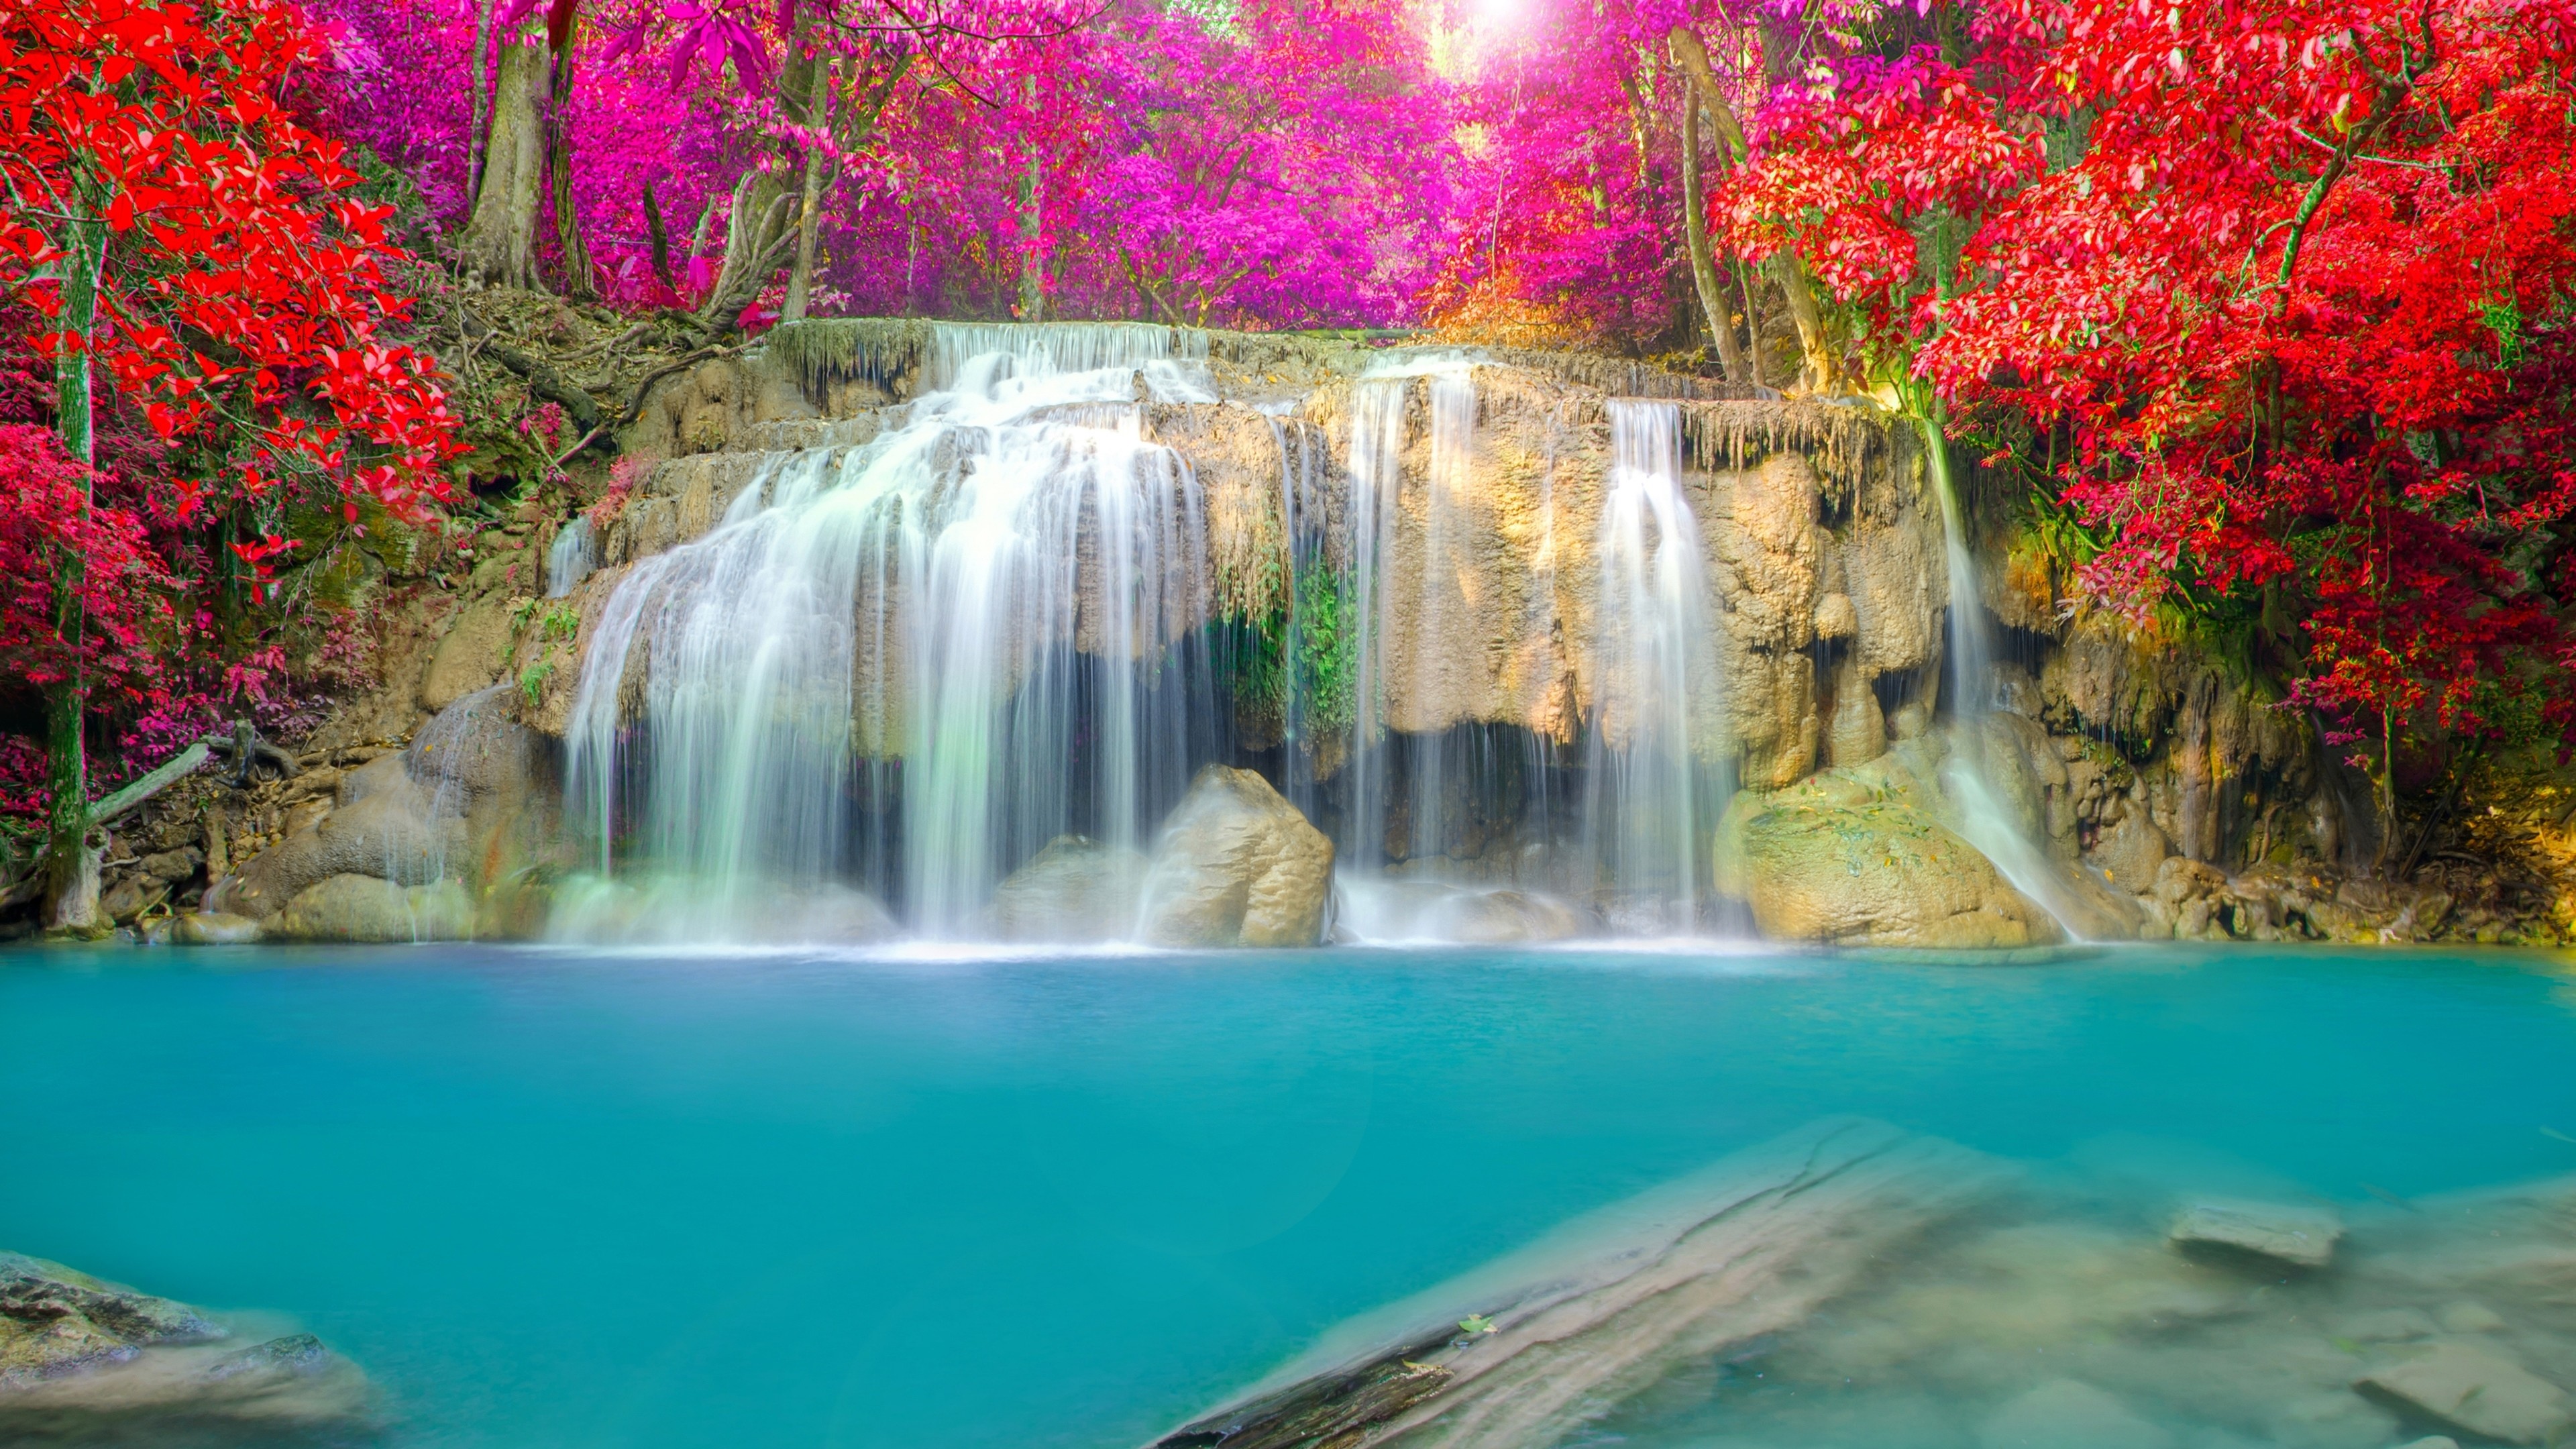 3840x2160 Earth - Waterfall Nature Rock Forest Tree Leaf Fall Red Pink Water  Turquoise Wallpaper